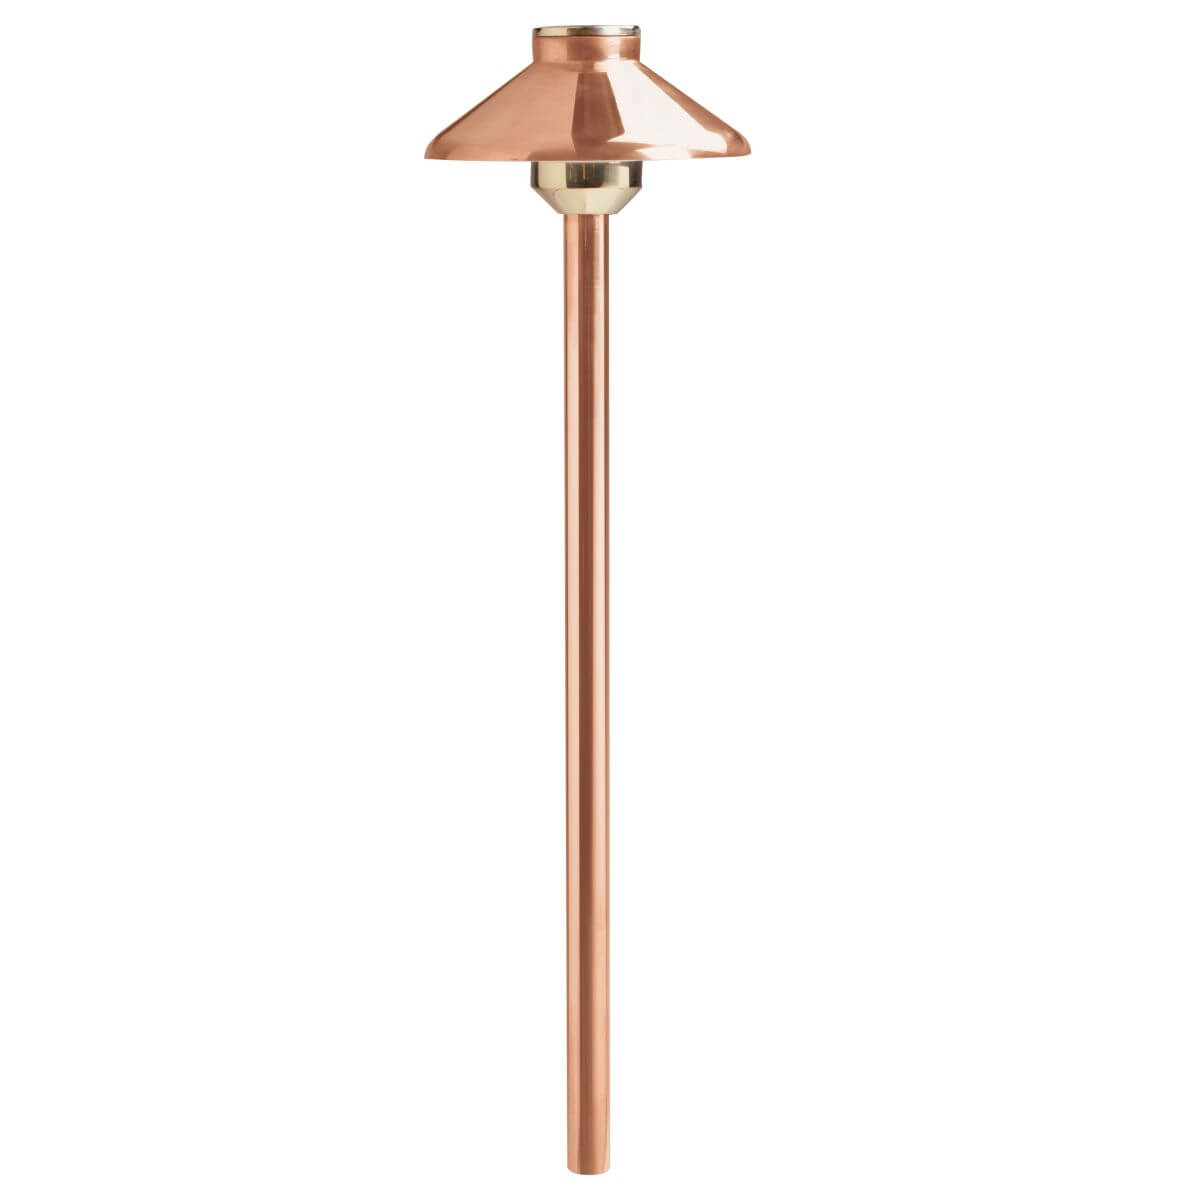 23 inch Tall Landscape 12V LED Path-Spread Light in Copper - 233184